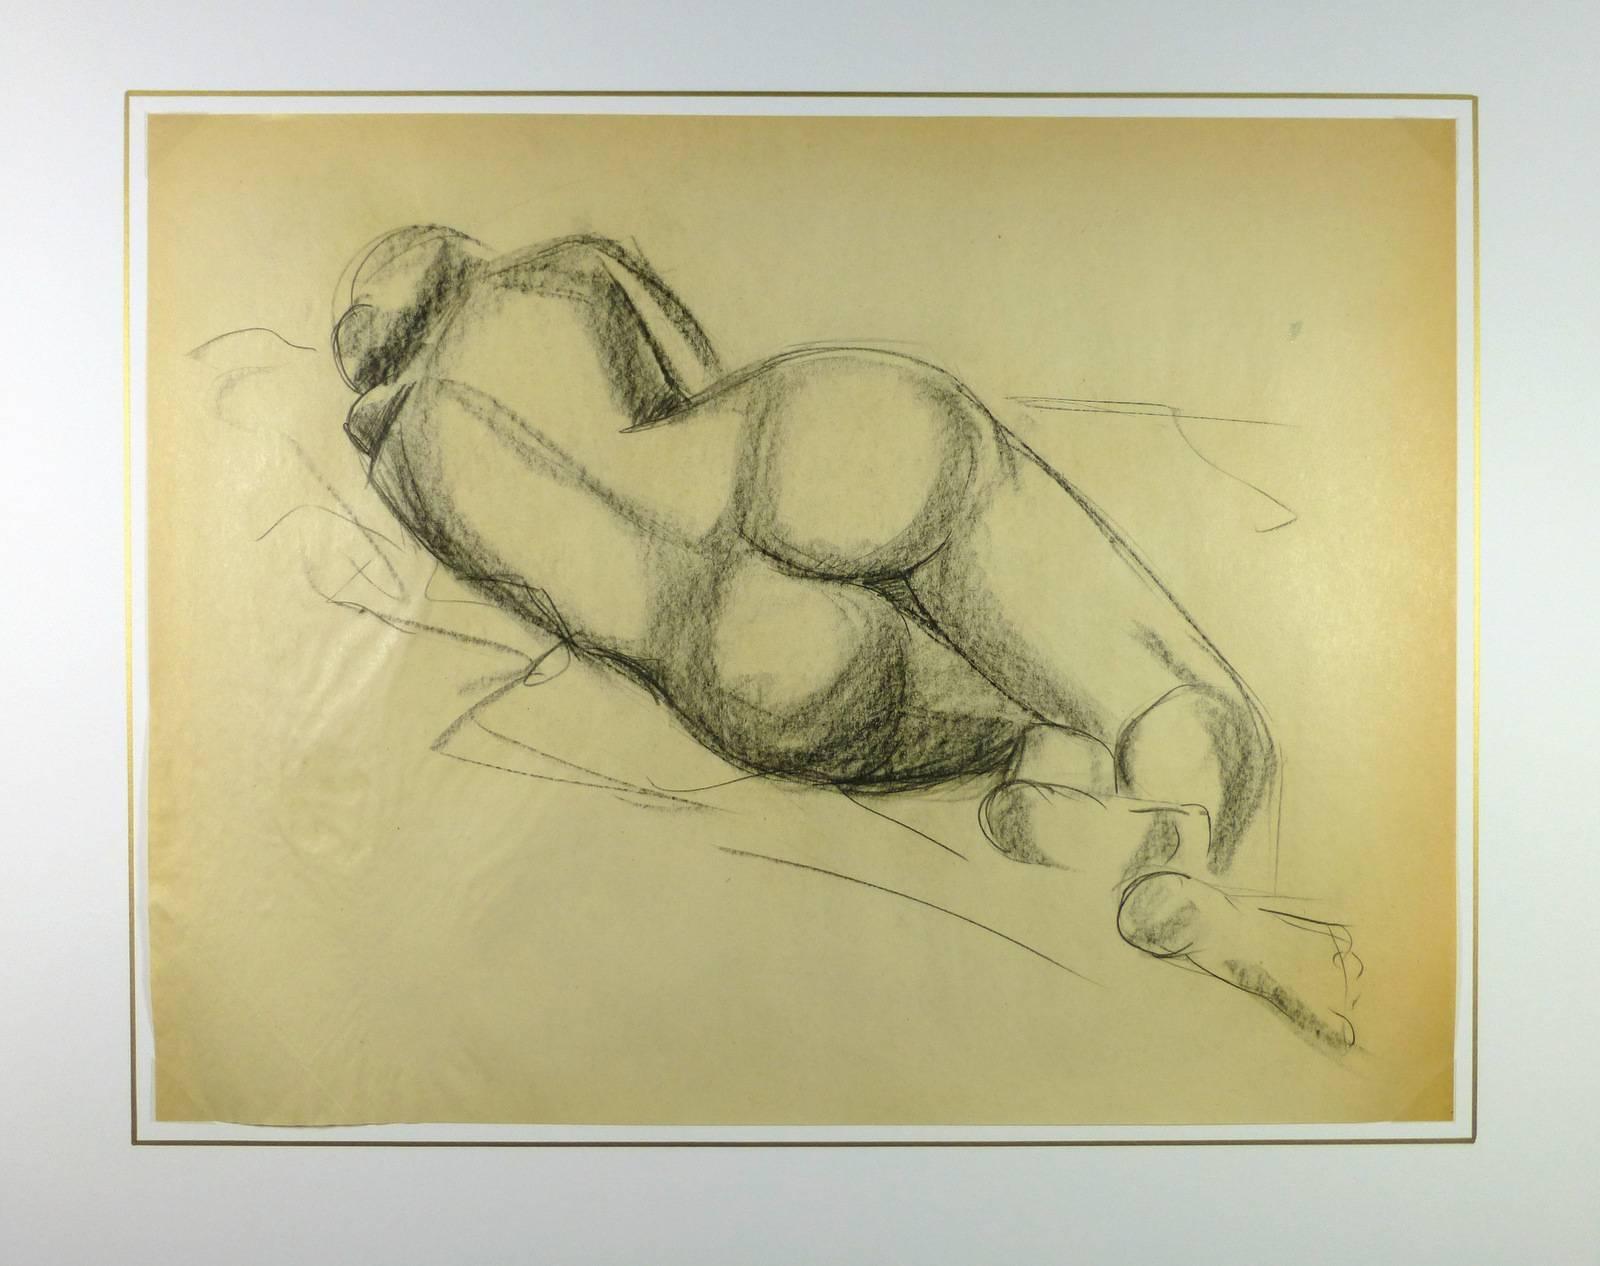 Classic nude charcoal sketch of back of figure laying on side by French artist A. Delamaire, circa 1930. 

Original artwork on paper displayed on a white mat with a gold border. Mat fits a standard-size frame.  Archival plastic sleeve and